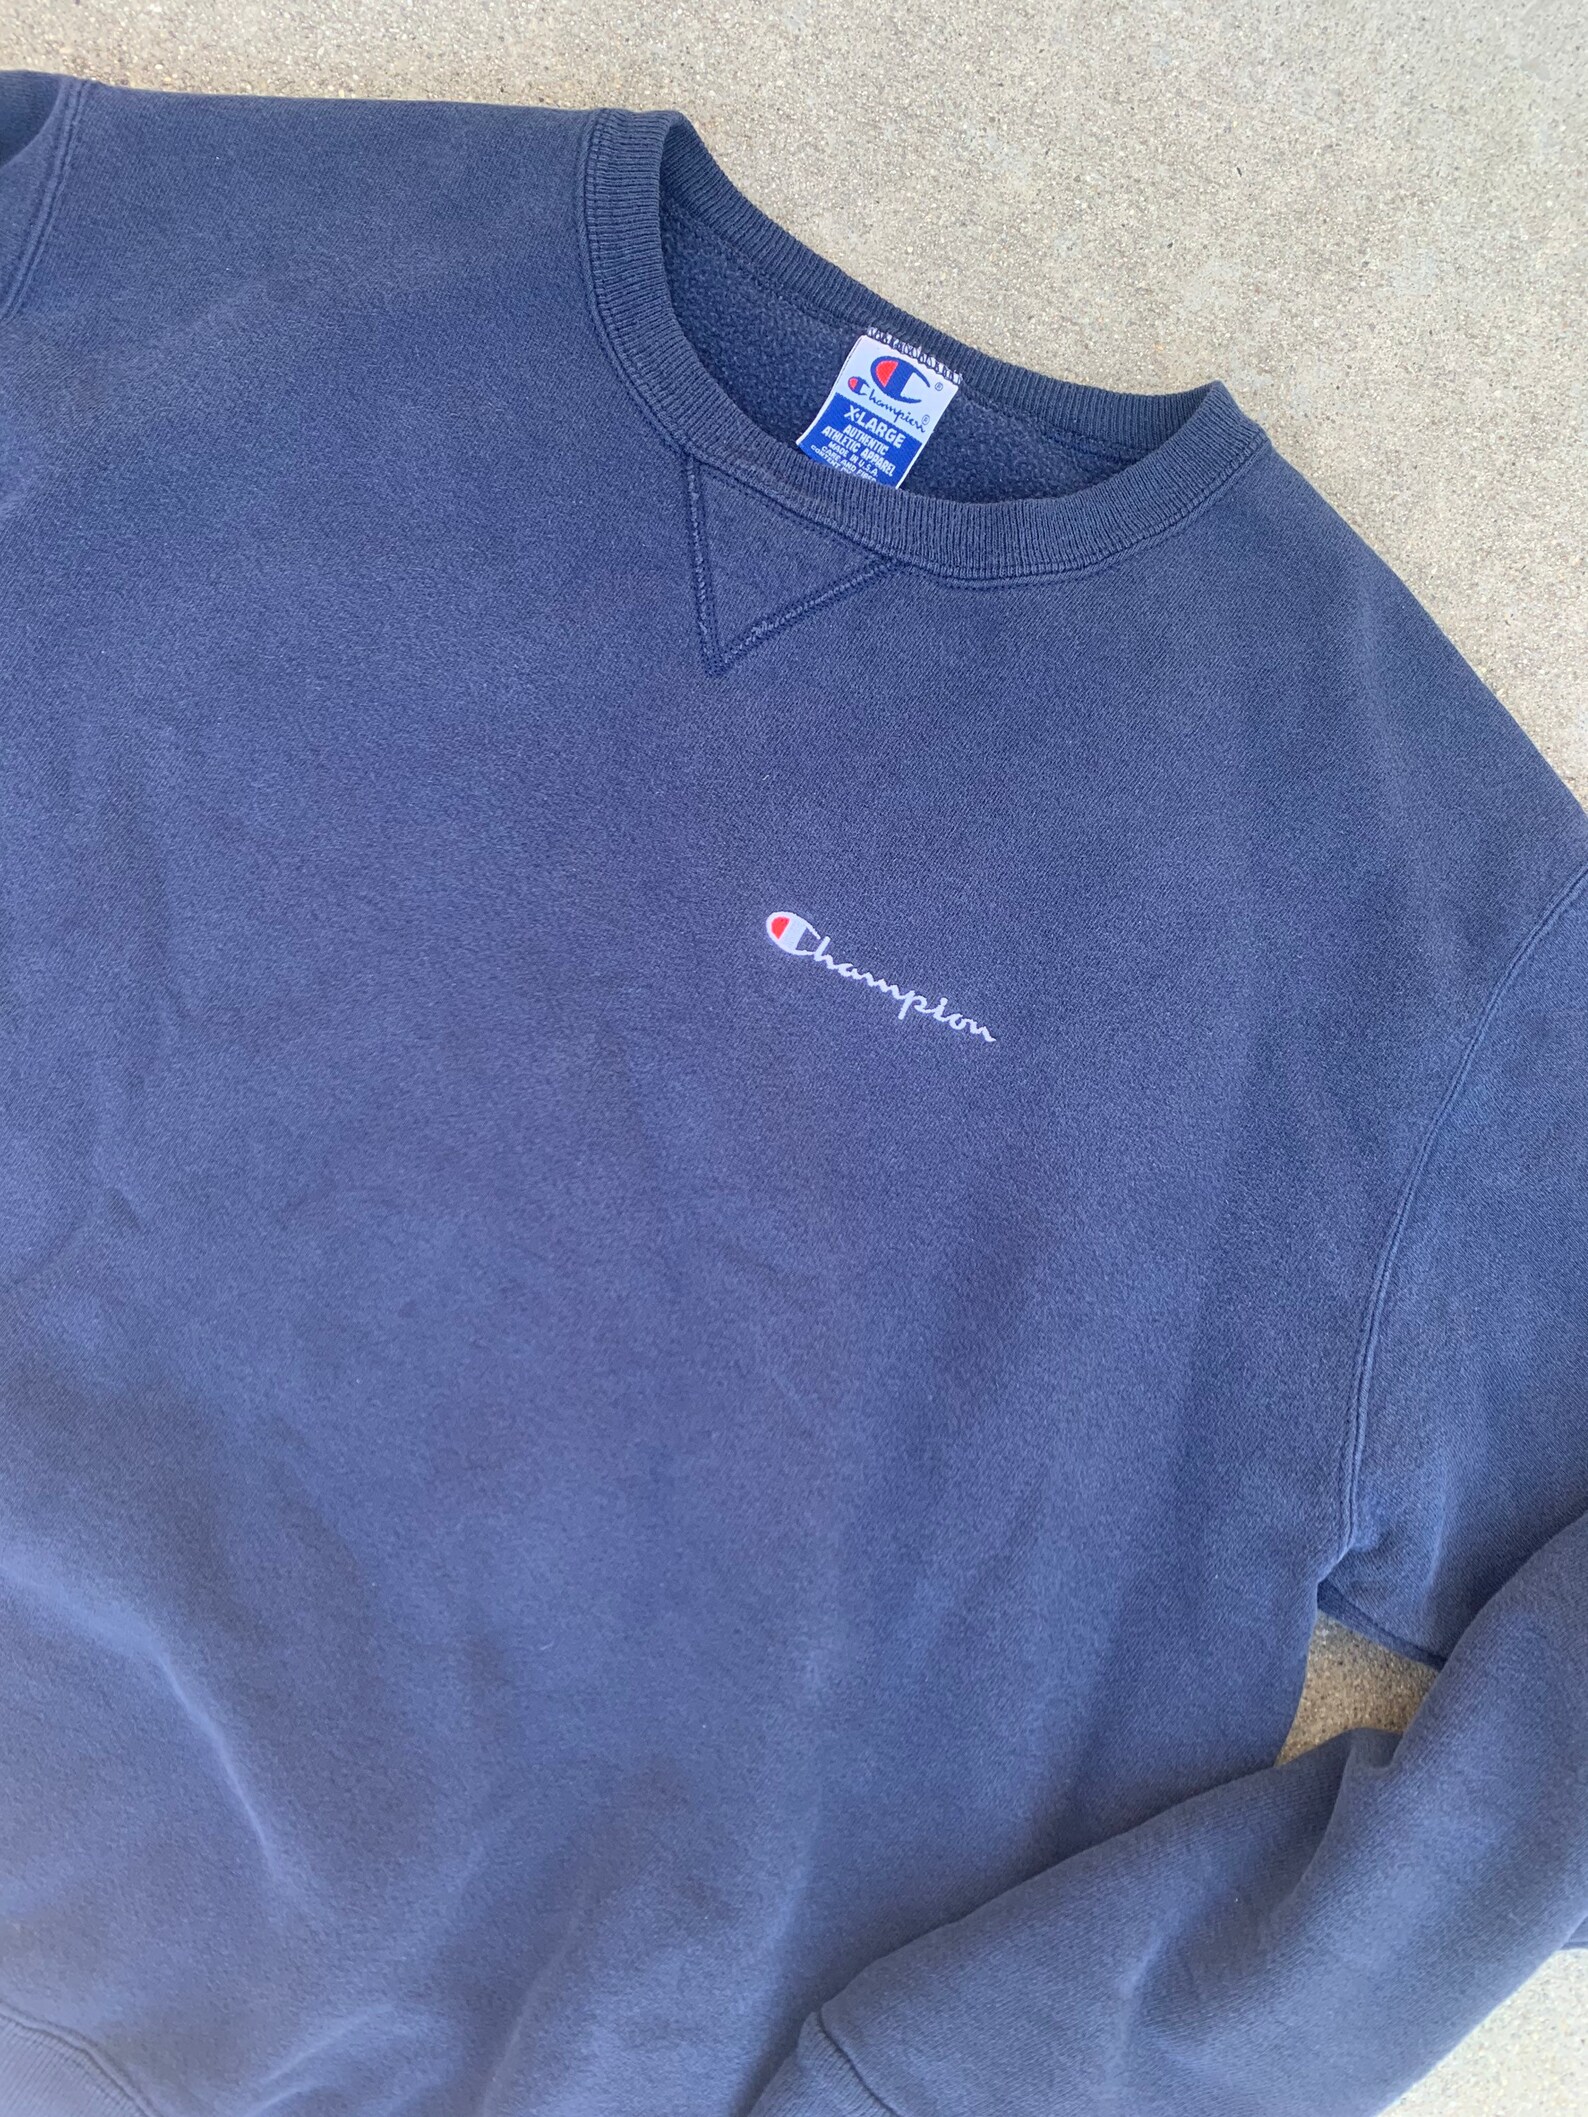 Champion Navy Blue Made in USA Vintage Classic Cotton Crewneck | Etsy